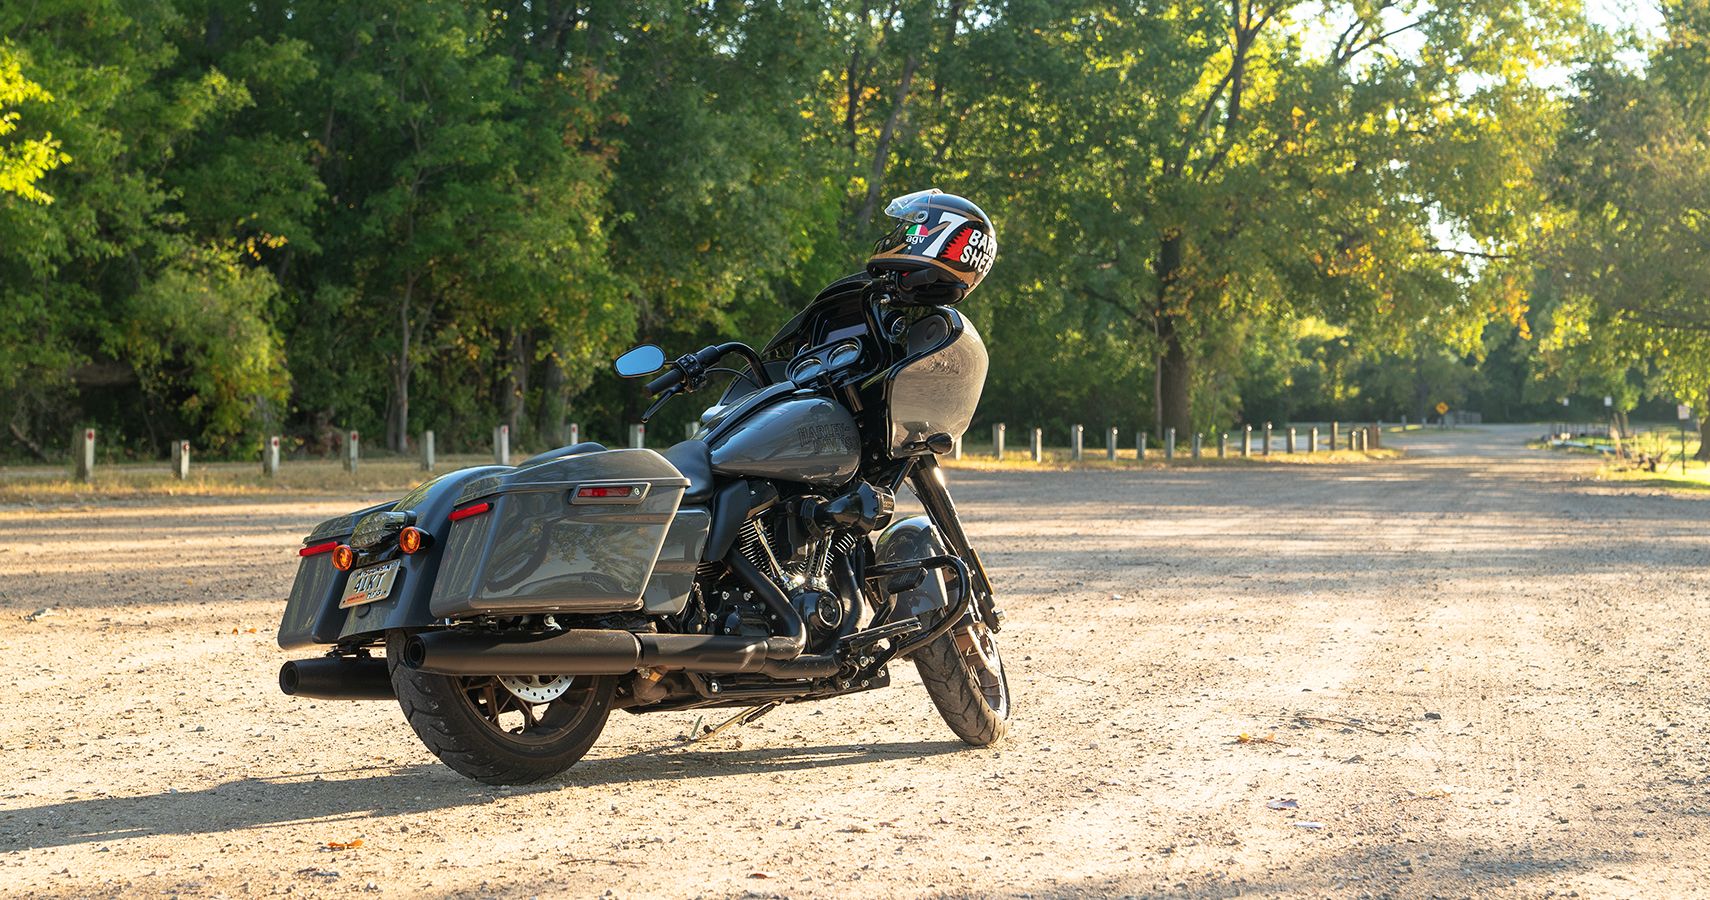 2022 Harley-Davidson Road Glide ST Review: A Battleship For The Road